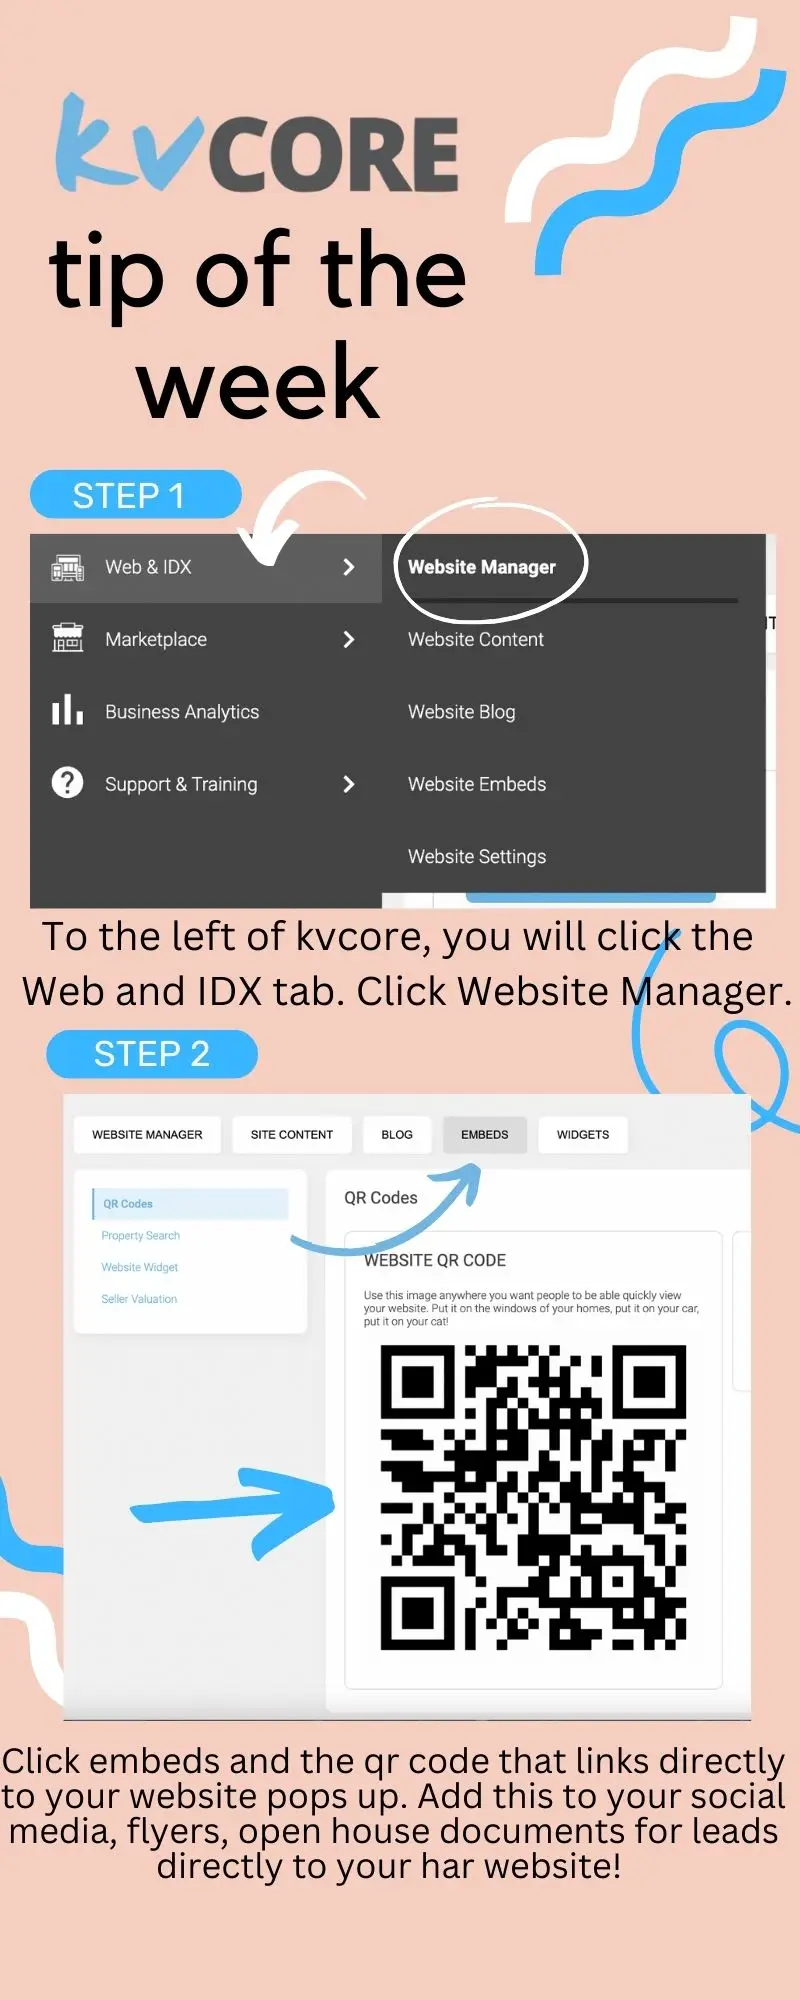 kvCORE has many features and is a great resource for you and your business. I hope these future tips will make your life easier and you find out something new (like I do every time I login)! Below is a step-by-step on how to save or screenshot the QR code that links directly to YOUR website. This is a great way to catch website leads that fill into your CRM! Simply screenshot and place on flyers, marketing materials, your business card, social media posts, open house materials, and everything else! It links to "yourname.homeadvantagerealty.com". Pro Tip: You also have the option to link your listing (or any in the MLS) to a QR code on the same page of "Embeds"